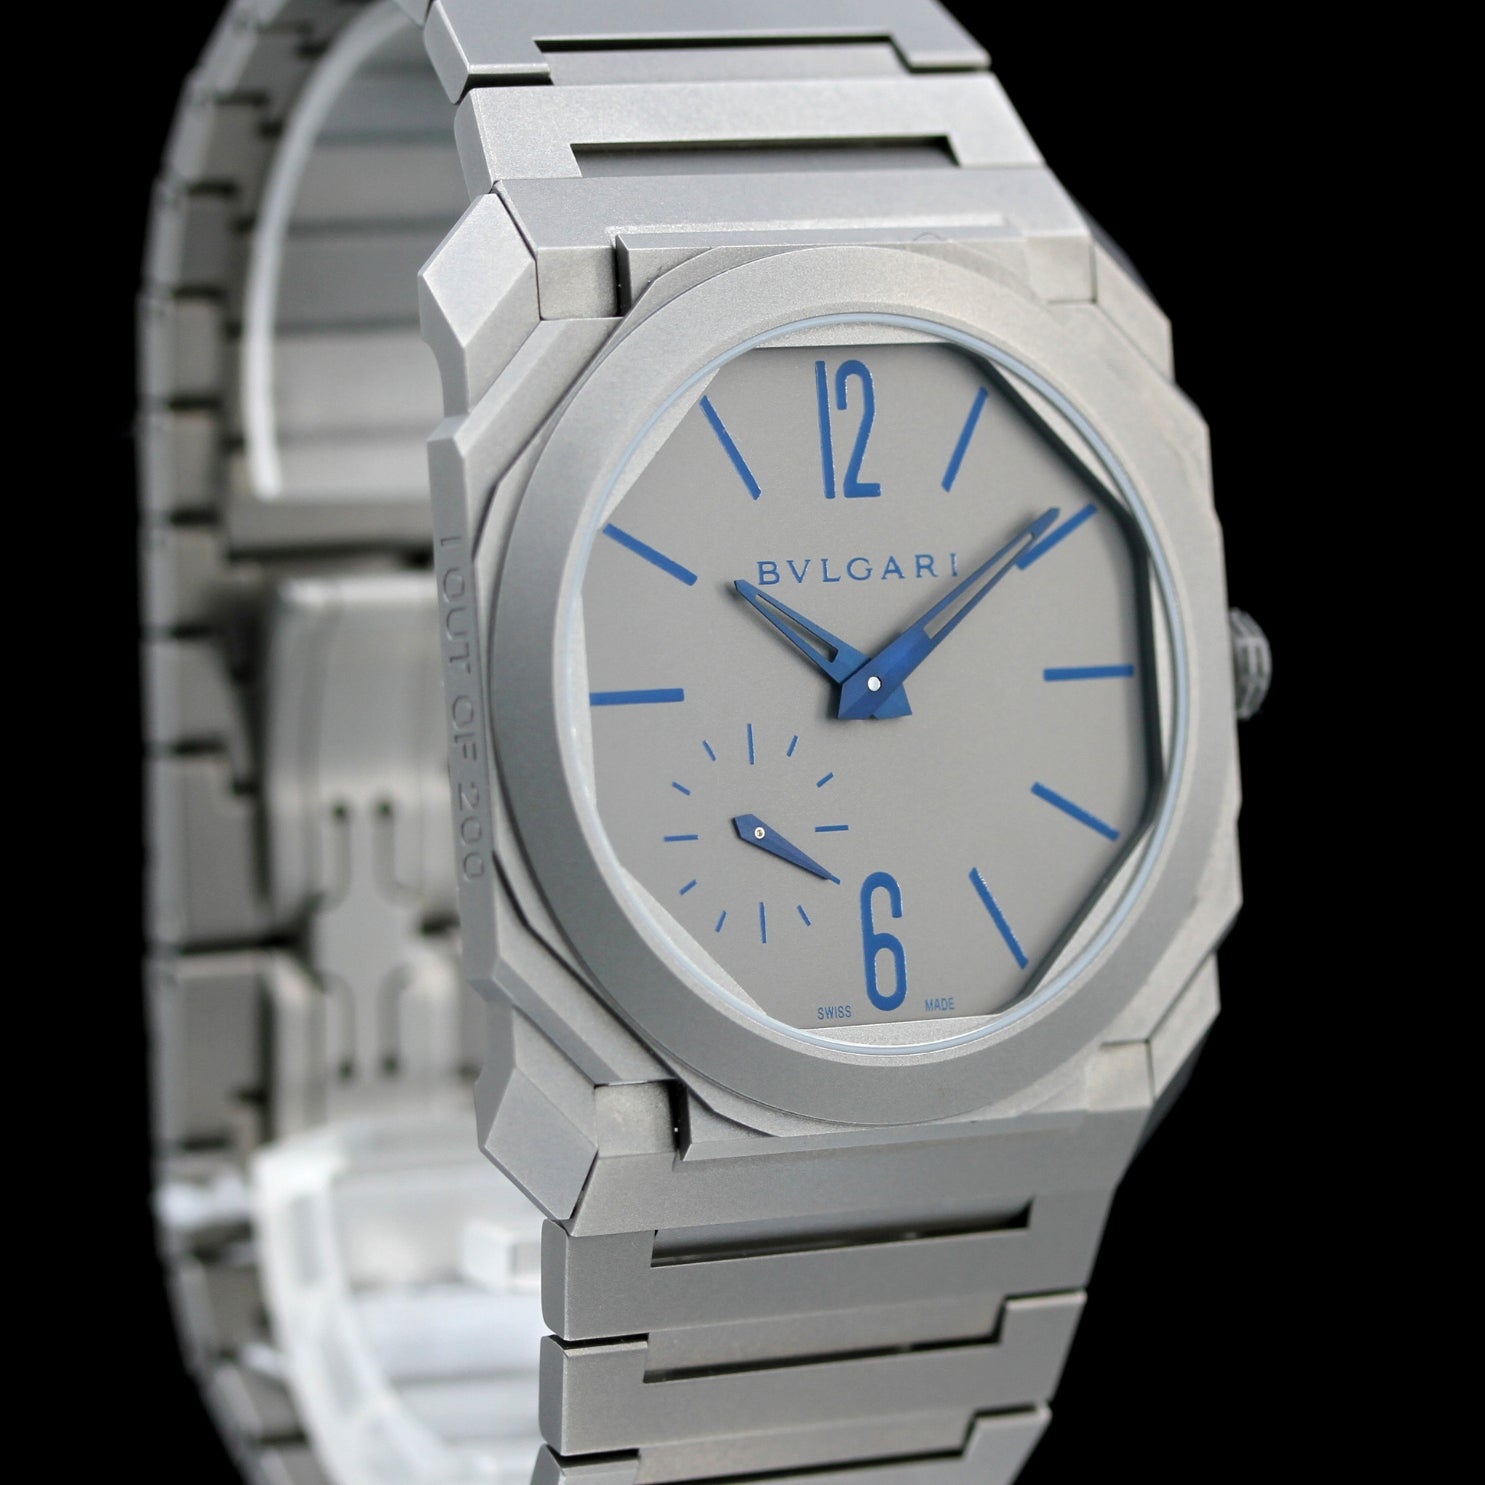 Bulgari Octa Finissimo, limited 1 out of 200, Ref. 102945, 2019, B+P - LUXUHRIA